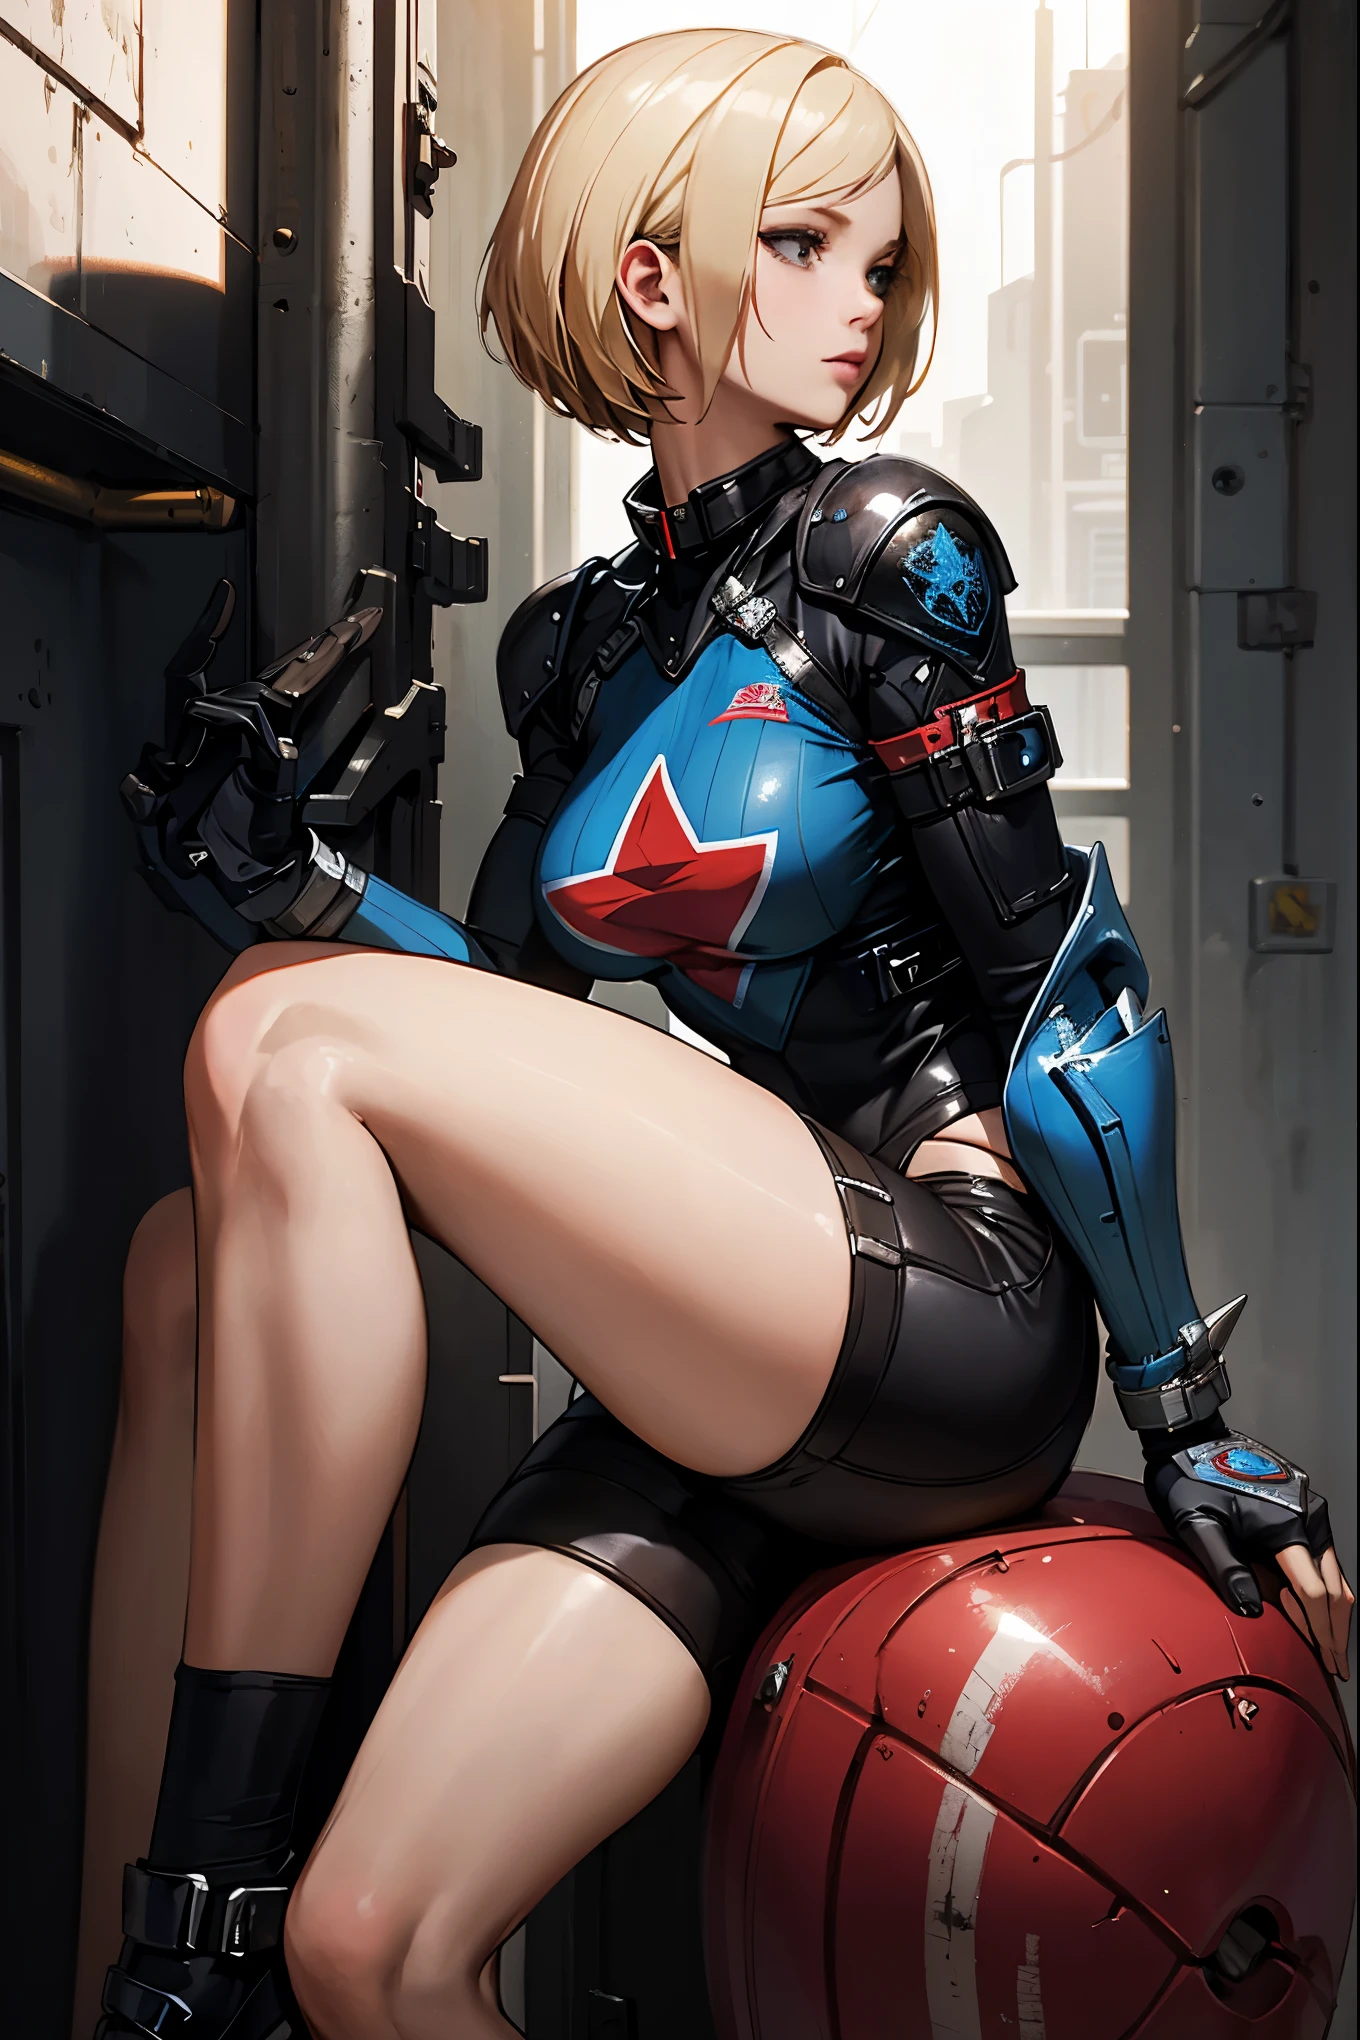 ((((closeup profile)))), (((anatomically correct body))), (((1 girl alone:1.6))), Ultra-realistic CG K ,((premium、8k、32k、Masterpiece)), (superfine illustration)、hyper detailed and beautiful eyes:1.4, (super high resolution), ((( short hair bob ))), 25 year old cyberpunk gladiator with perfect body, Shoulder pads with metal spikes., Gladiadores in Brooklyn, (( short hair bob )), Torn rugby team t-shirt, wild urban style by Simon Bisley, short blonde hair, Metallic protection on the left arm with complex graphics......, Dark red with white stars and blue and white stripes., armor, Full of spikes and rivets., poison tattoo (((Image from the knee up))), short white blonde hair, In the background、 There is a wall with an intricate design painted by Shepard Fairey......